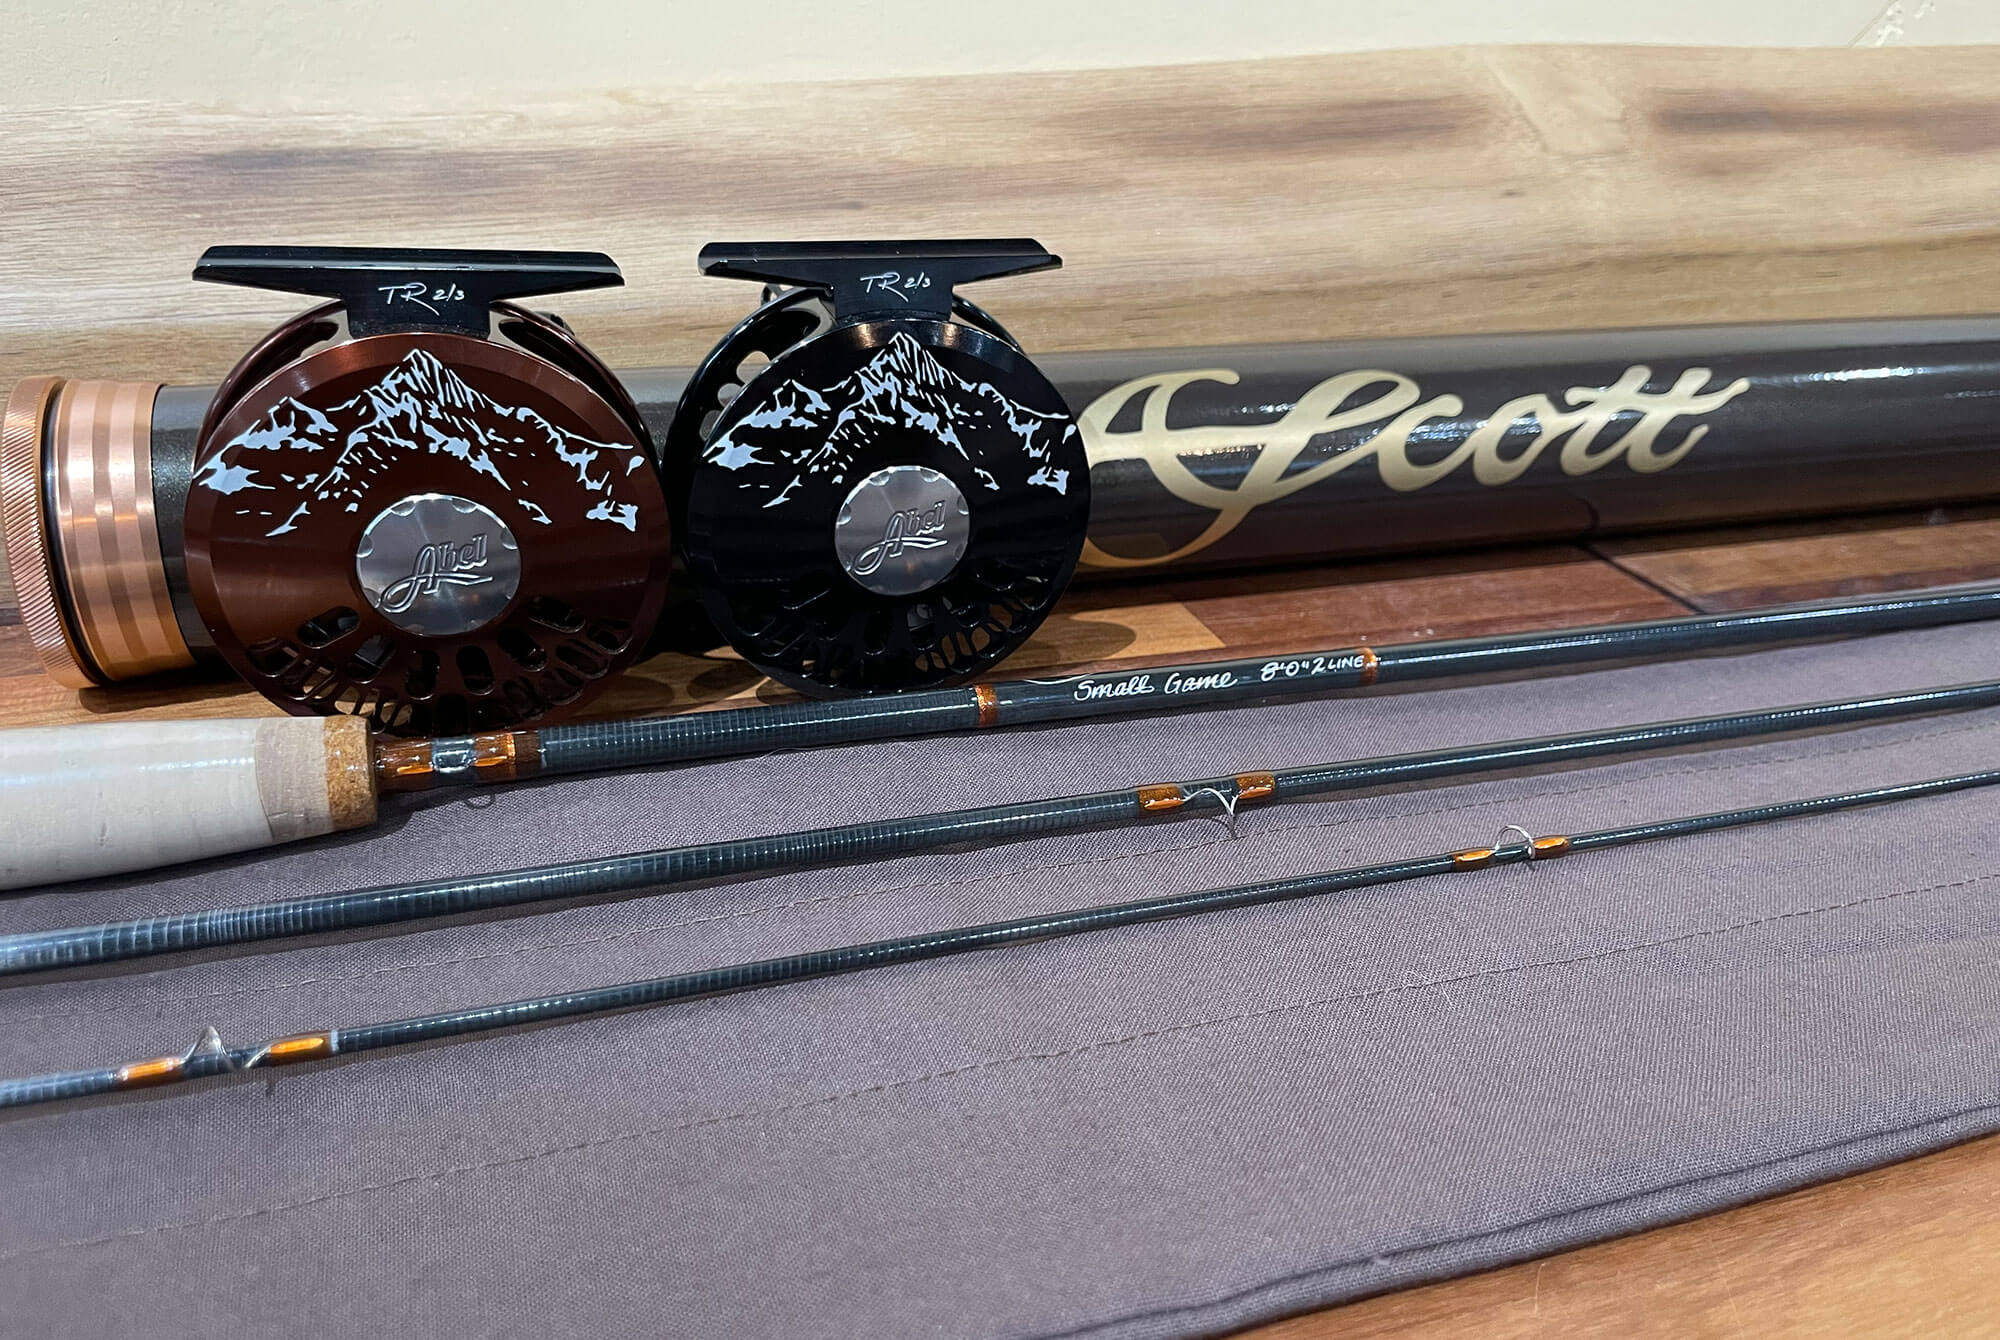 Scott Fly Rod Company - This rod and reel set up will go down in history as  one of the best, you watch 👀. Scott G Series + Ross Reels Colorado LT